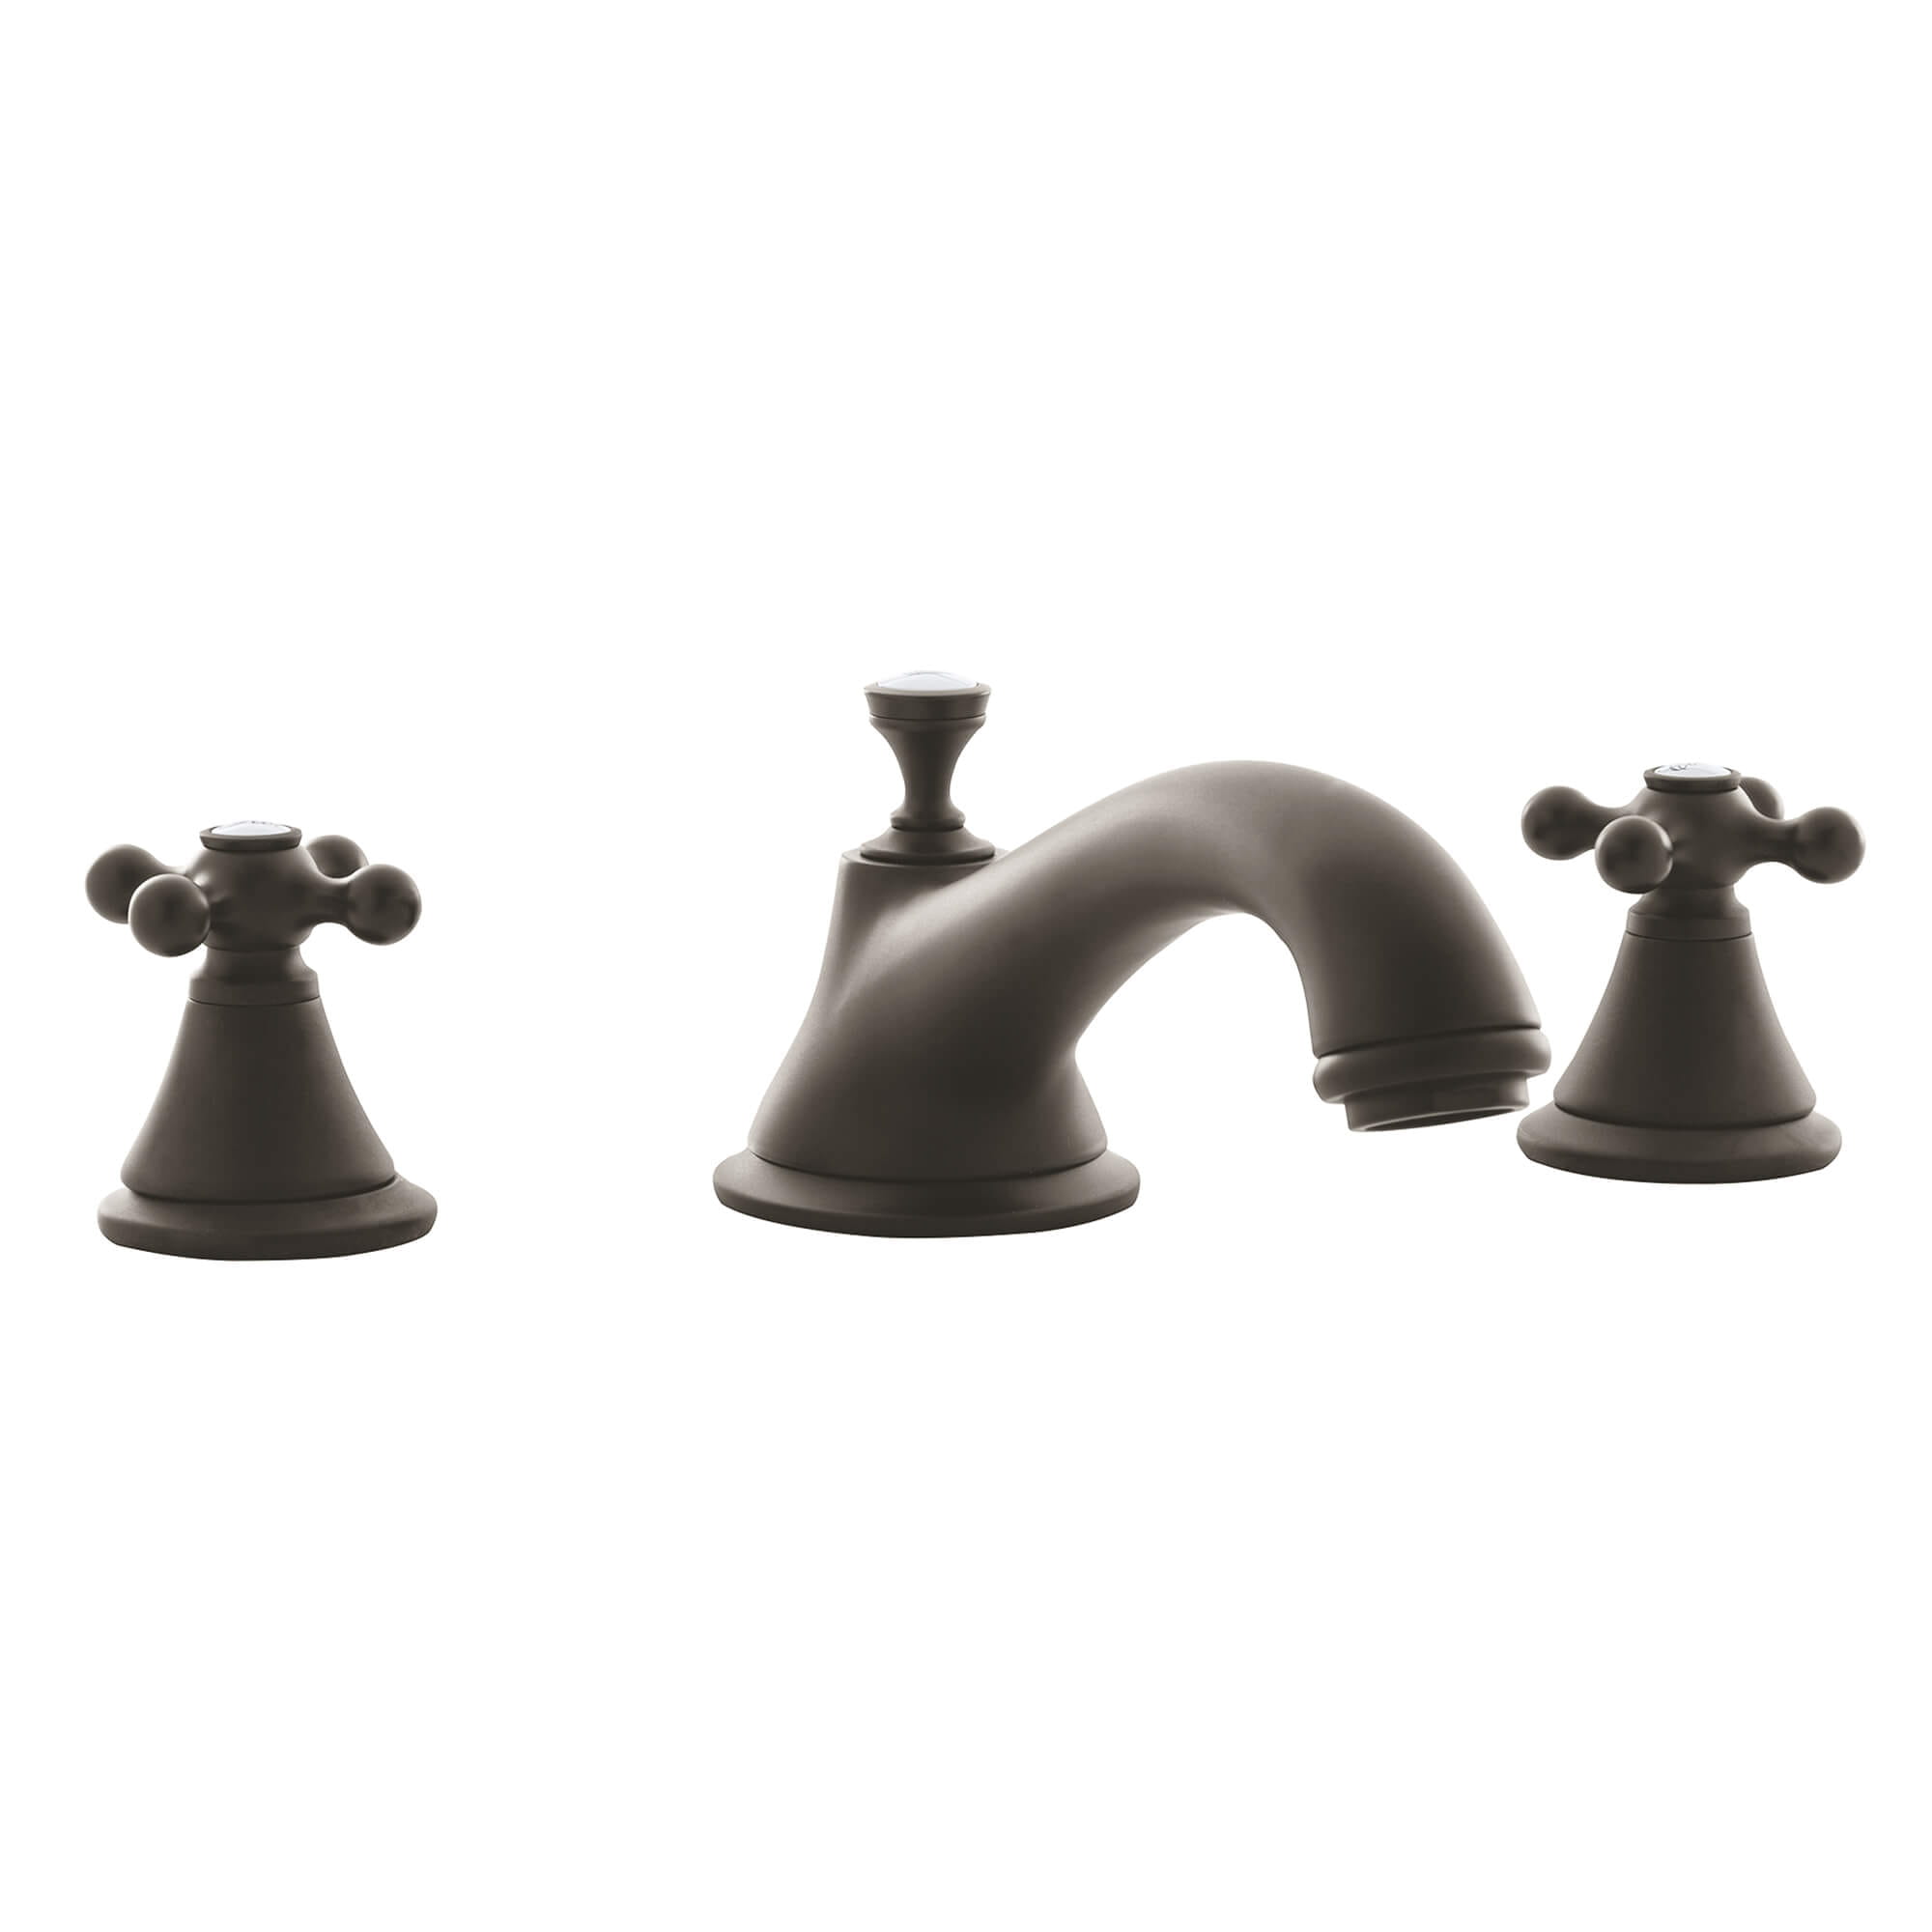 Cross Handles Pair GROHE OIL RUBBED BRONZE